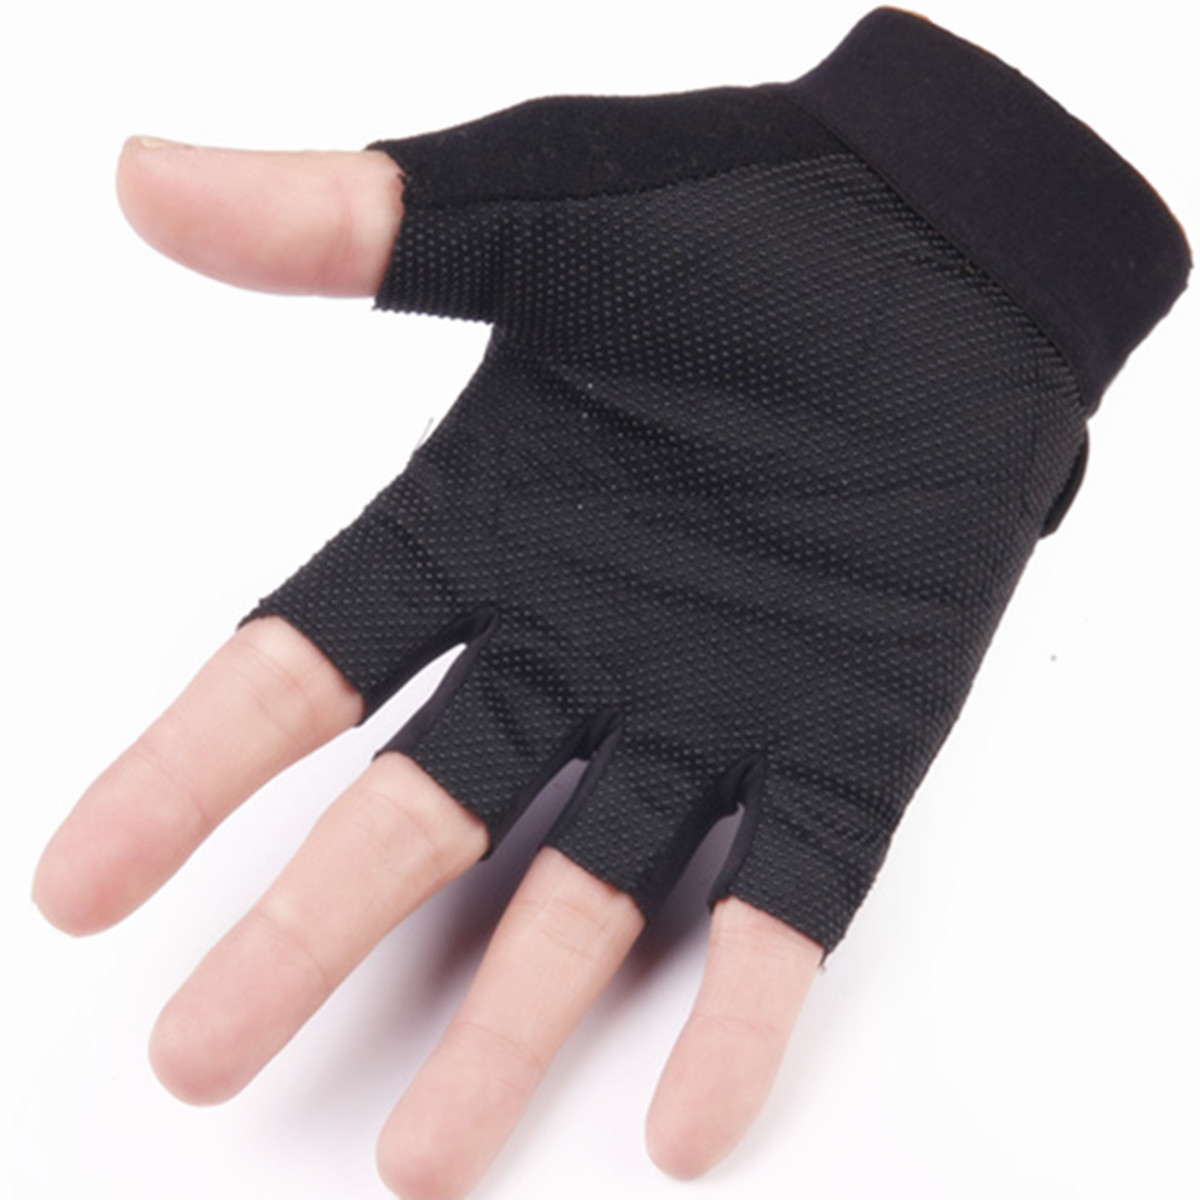 Unisex-Microfiber-Cycling-Bicycle-Half-Finger-Gloves-Gym-Outdoor-Sport-Fingerless-Mittens-1102329